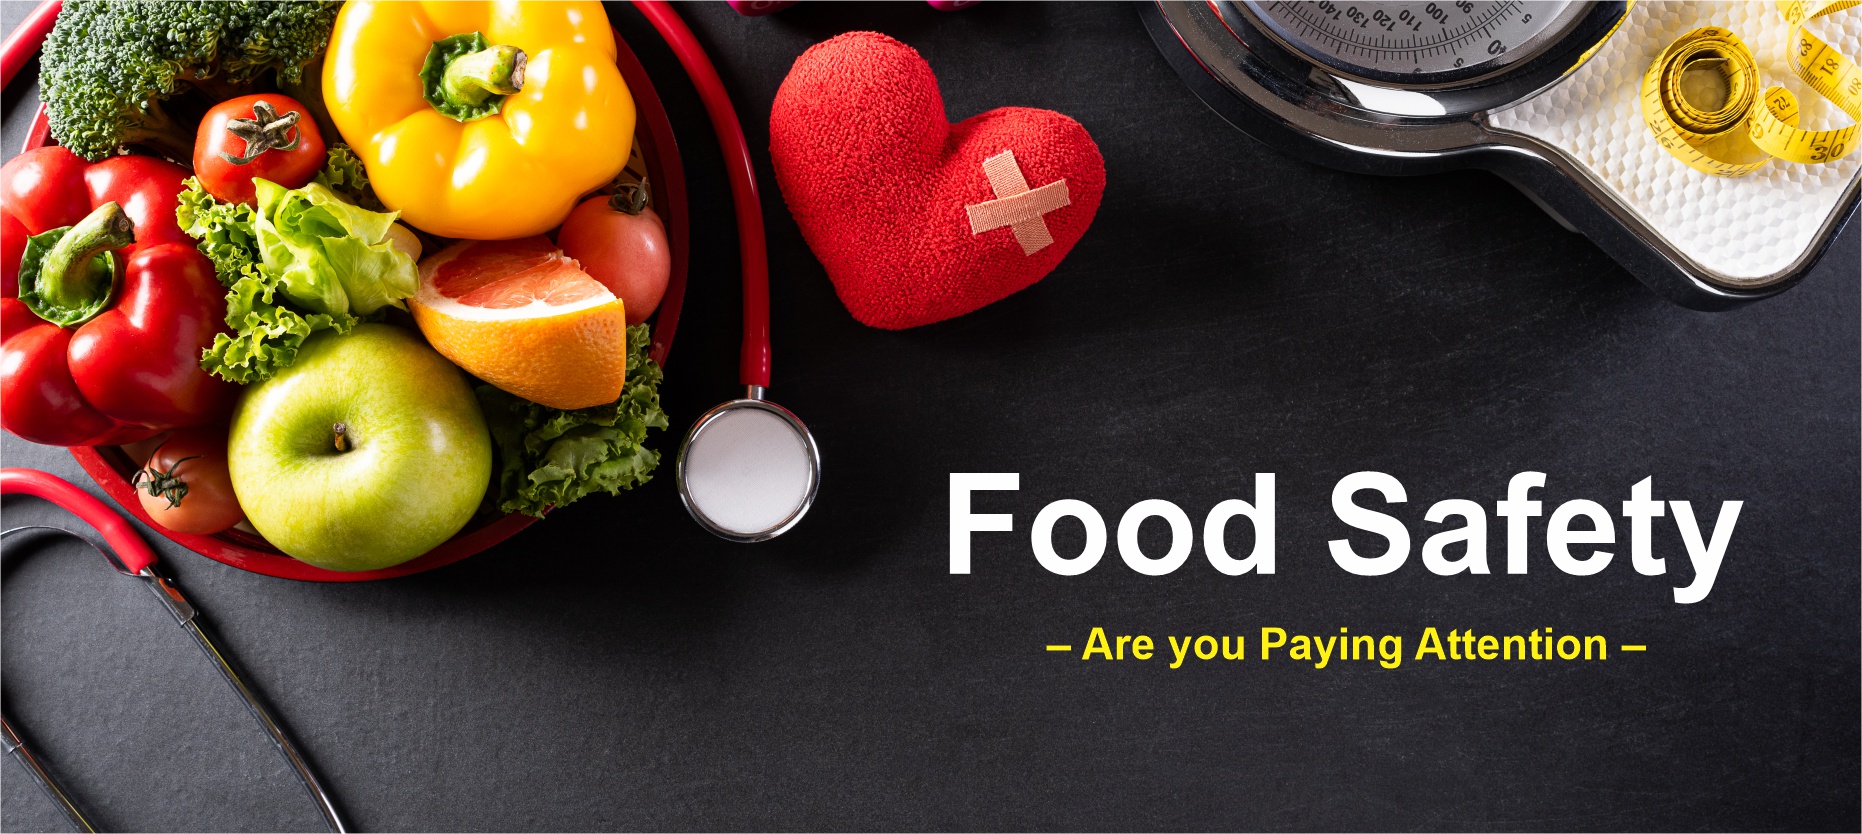 Food Safety – Are you Paying Attention?